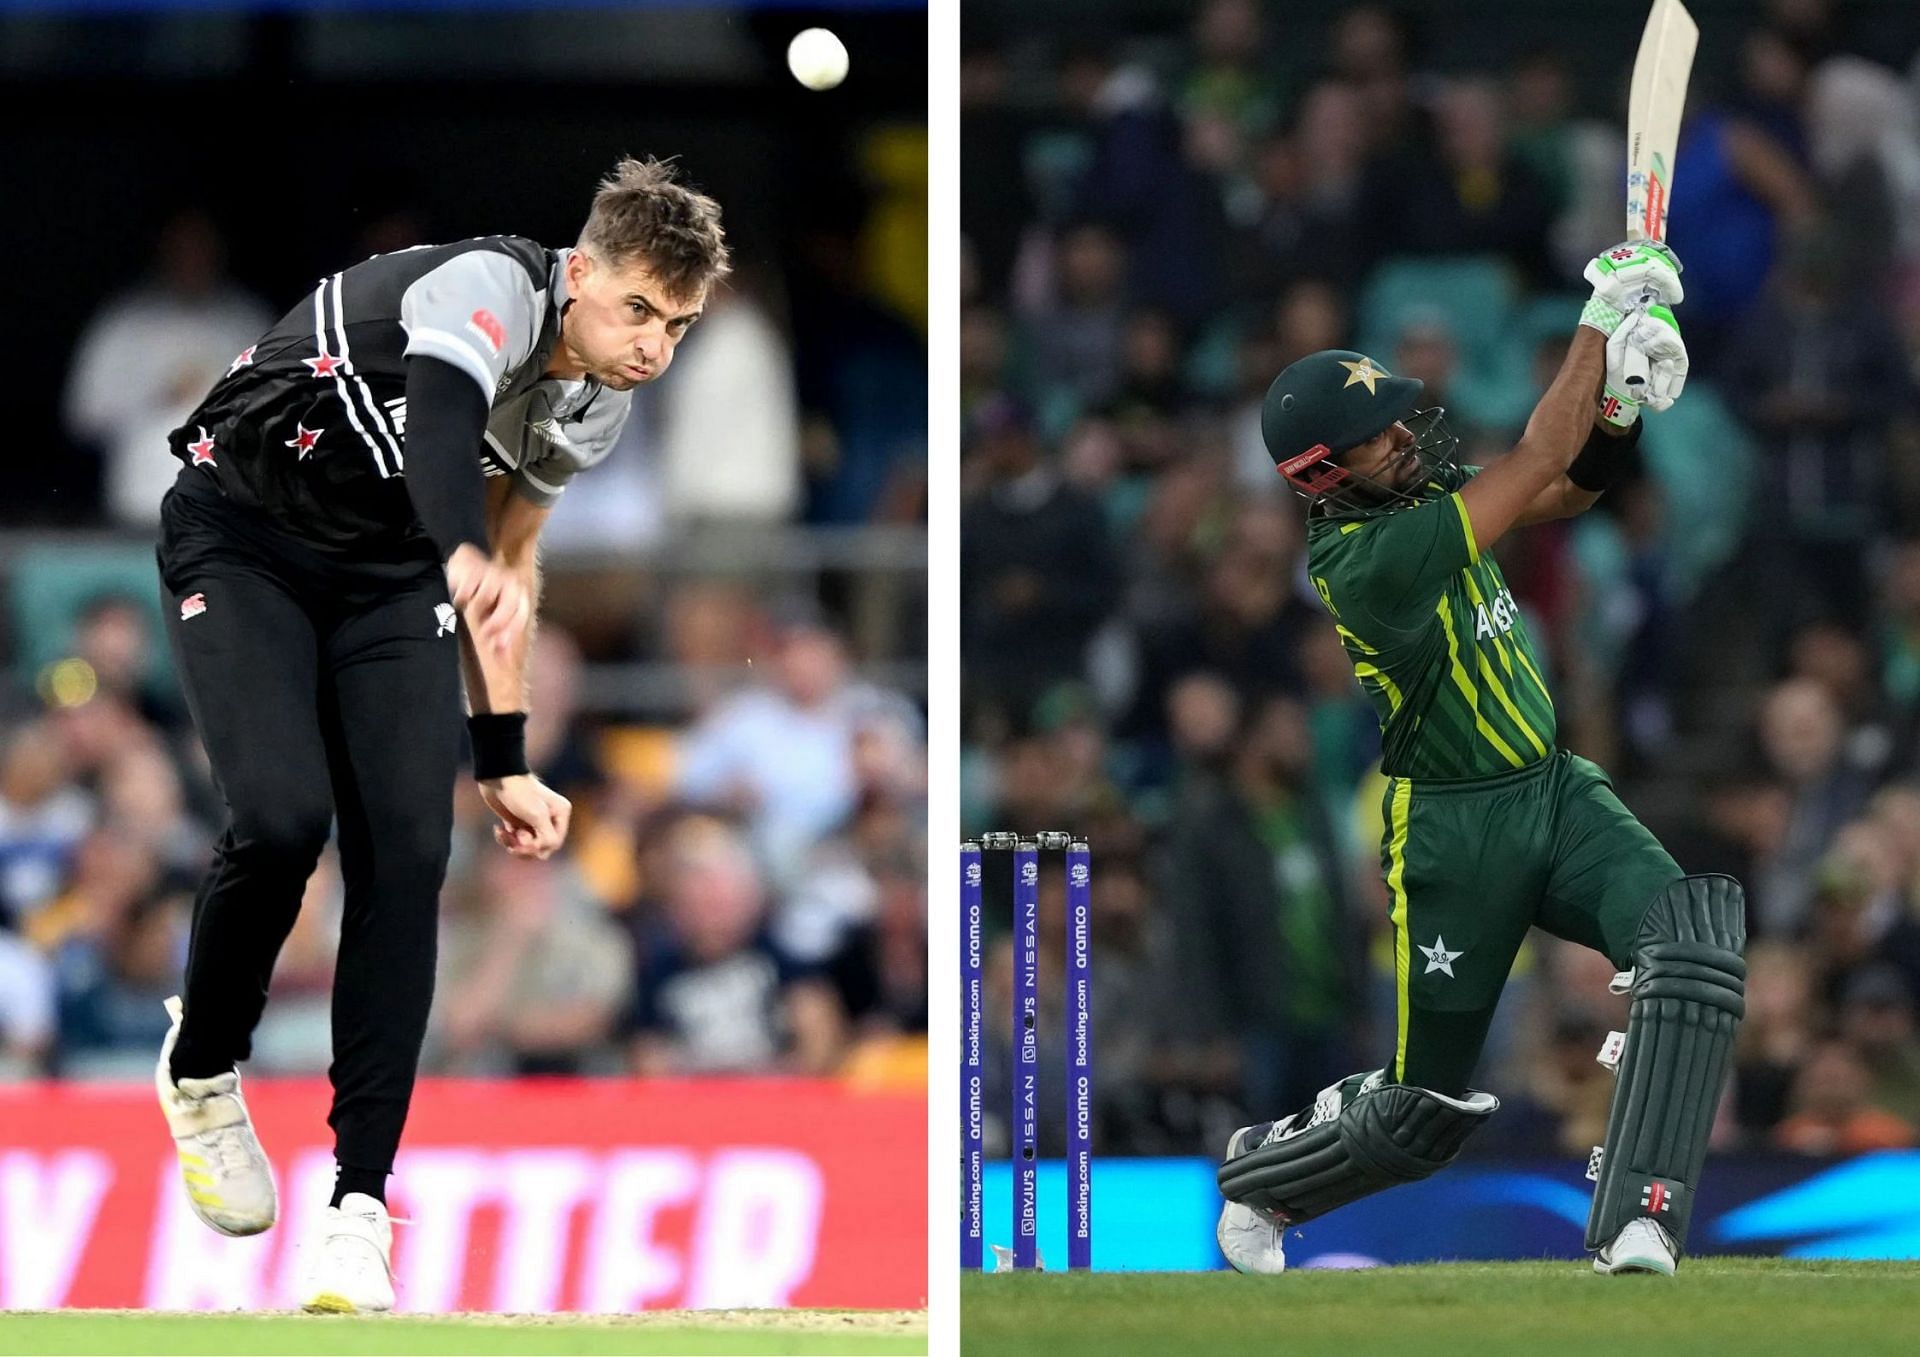 Tim Southee and Babar Azam will go up against each other in the first semifinal of the T20 World Cup.